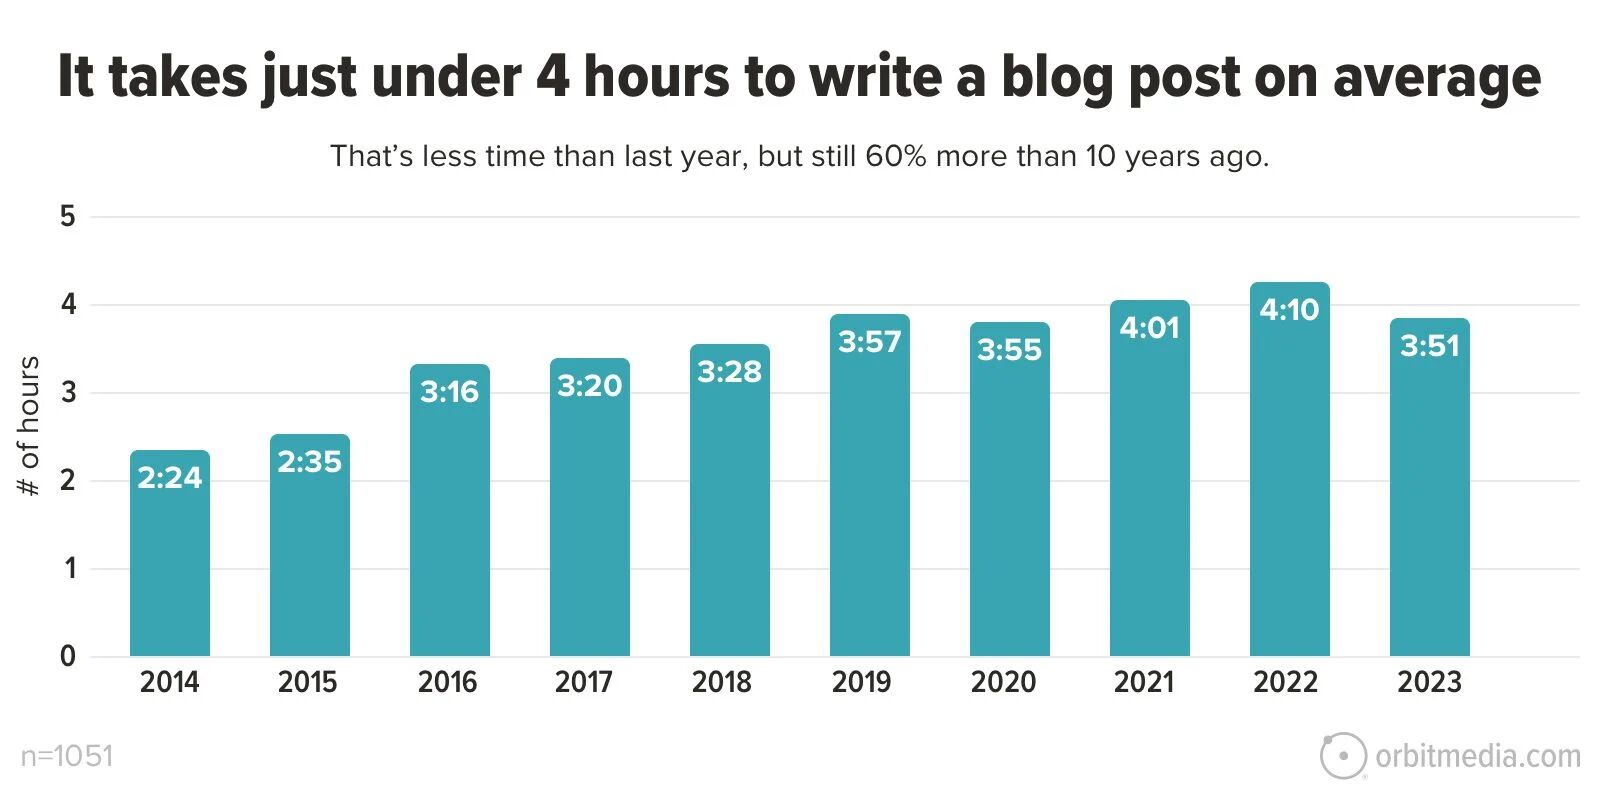 Chart showing the amount of time needed to write a blog post on average